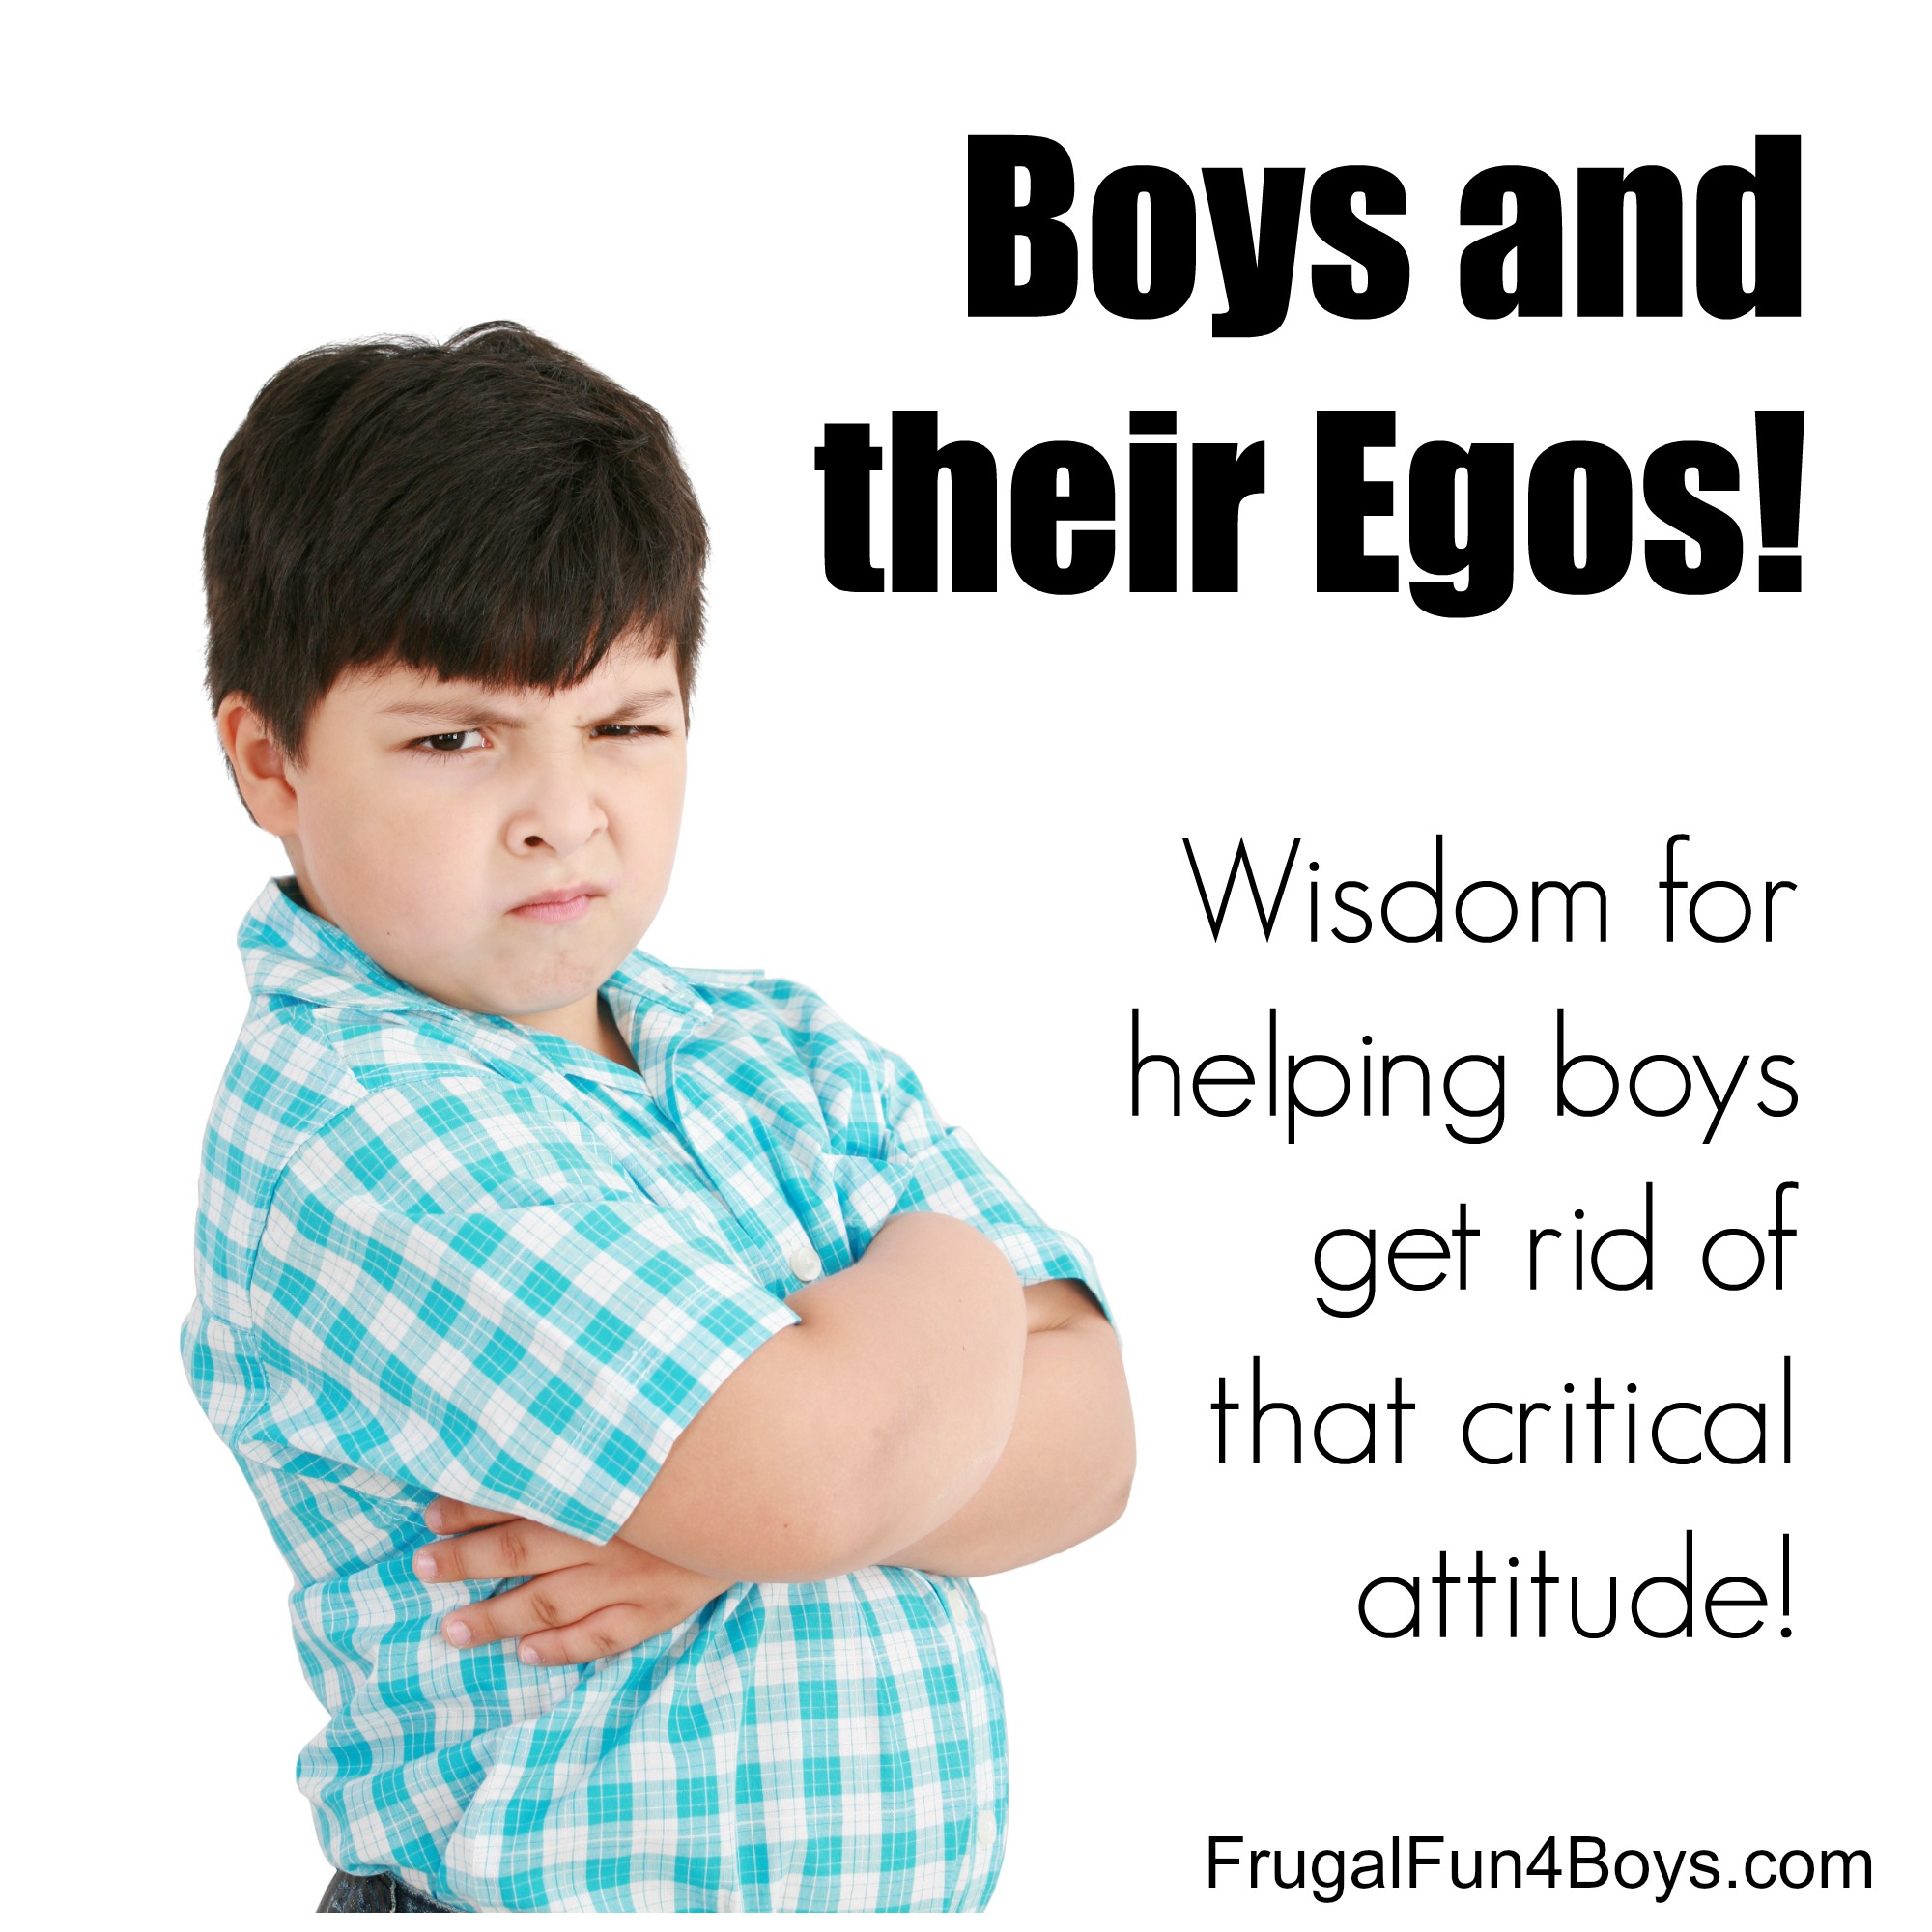 Boys and their Egos: Wisdom for Helping Boys Replace a Critical Attitude with a Spirit of Encouragement